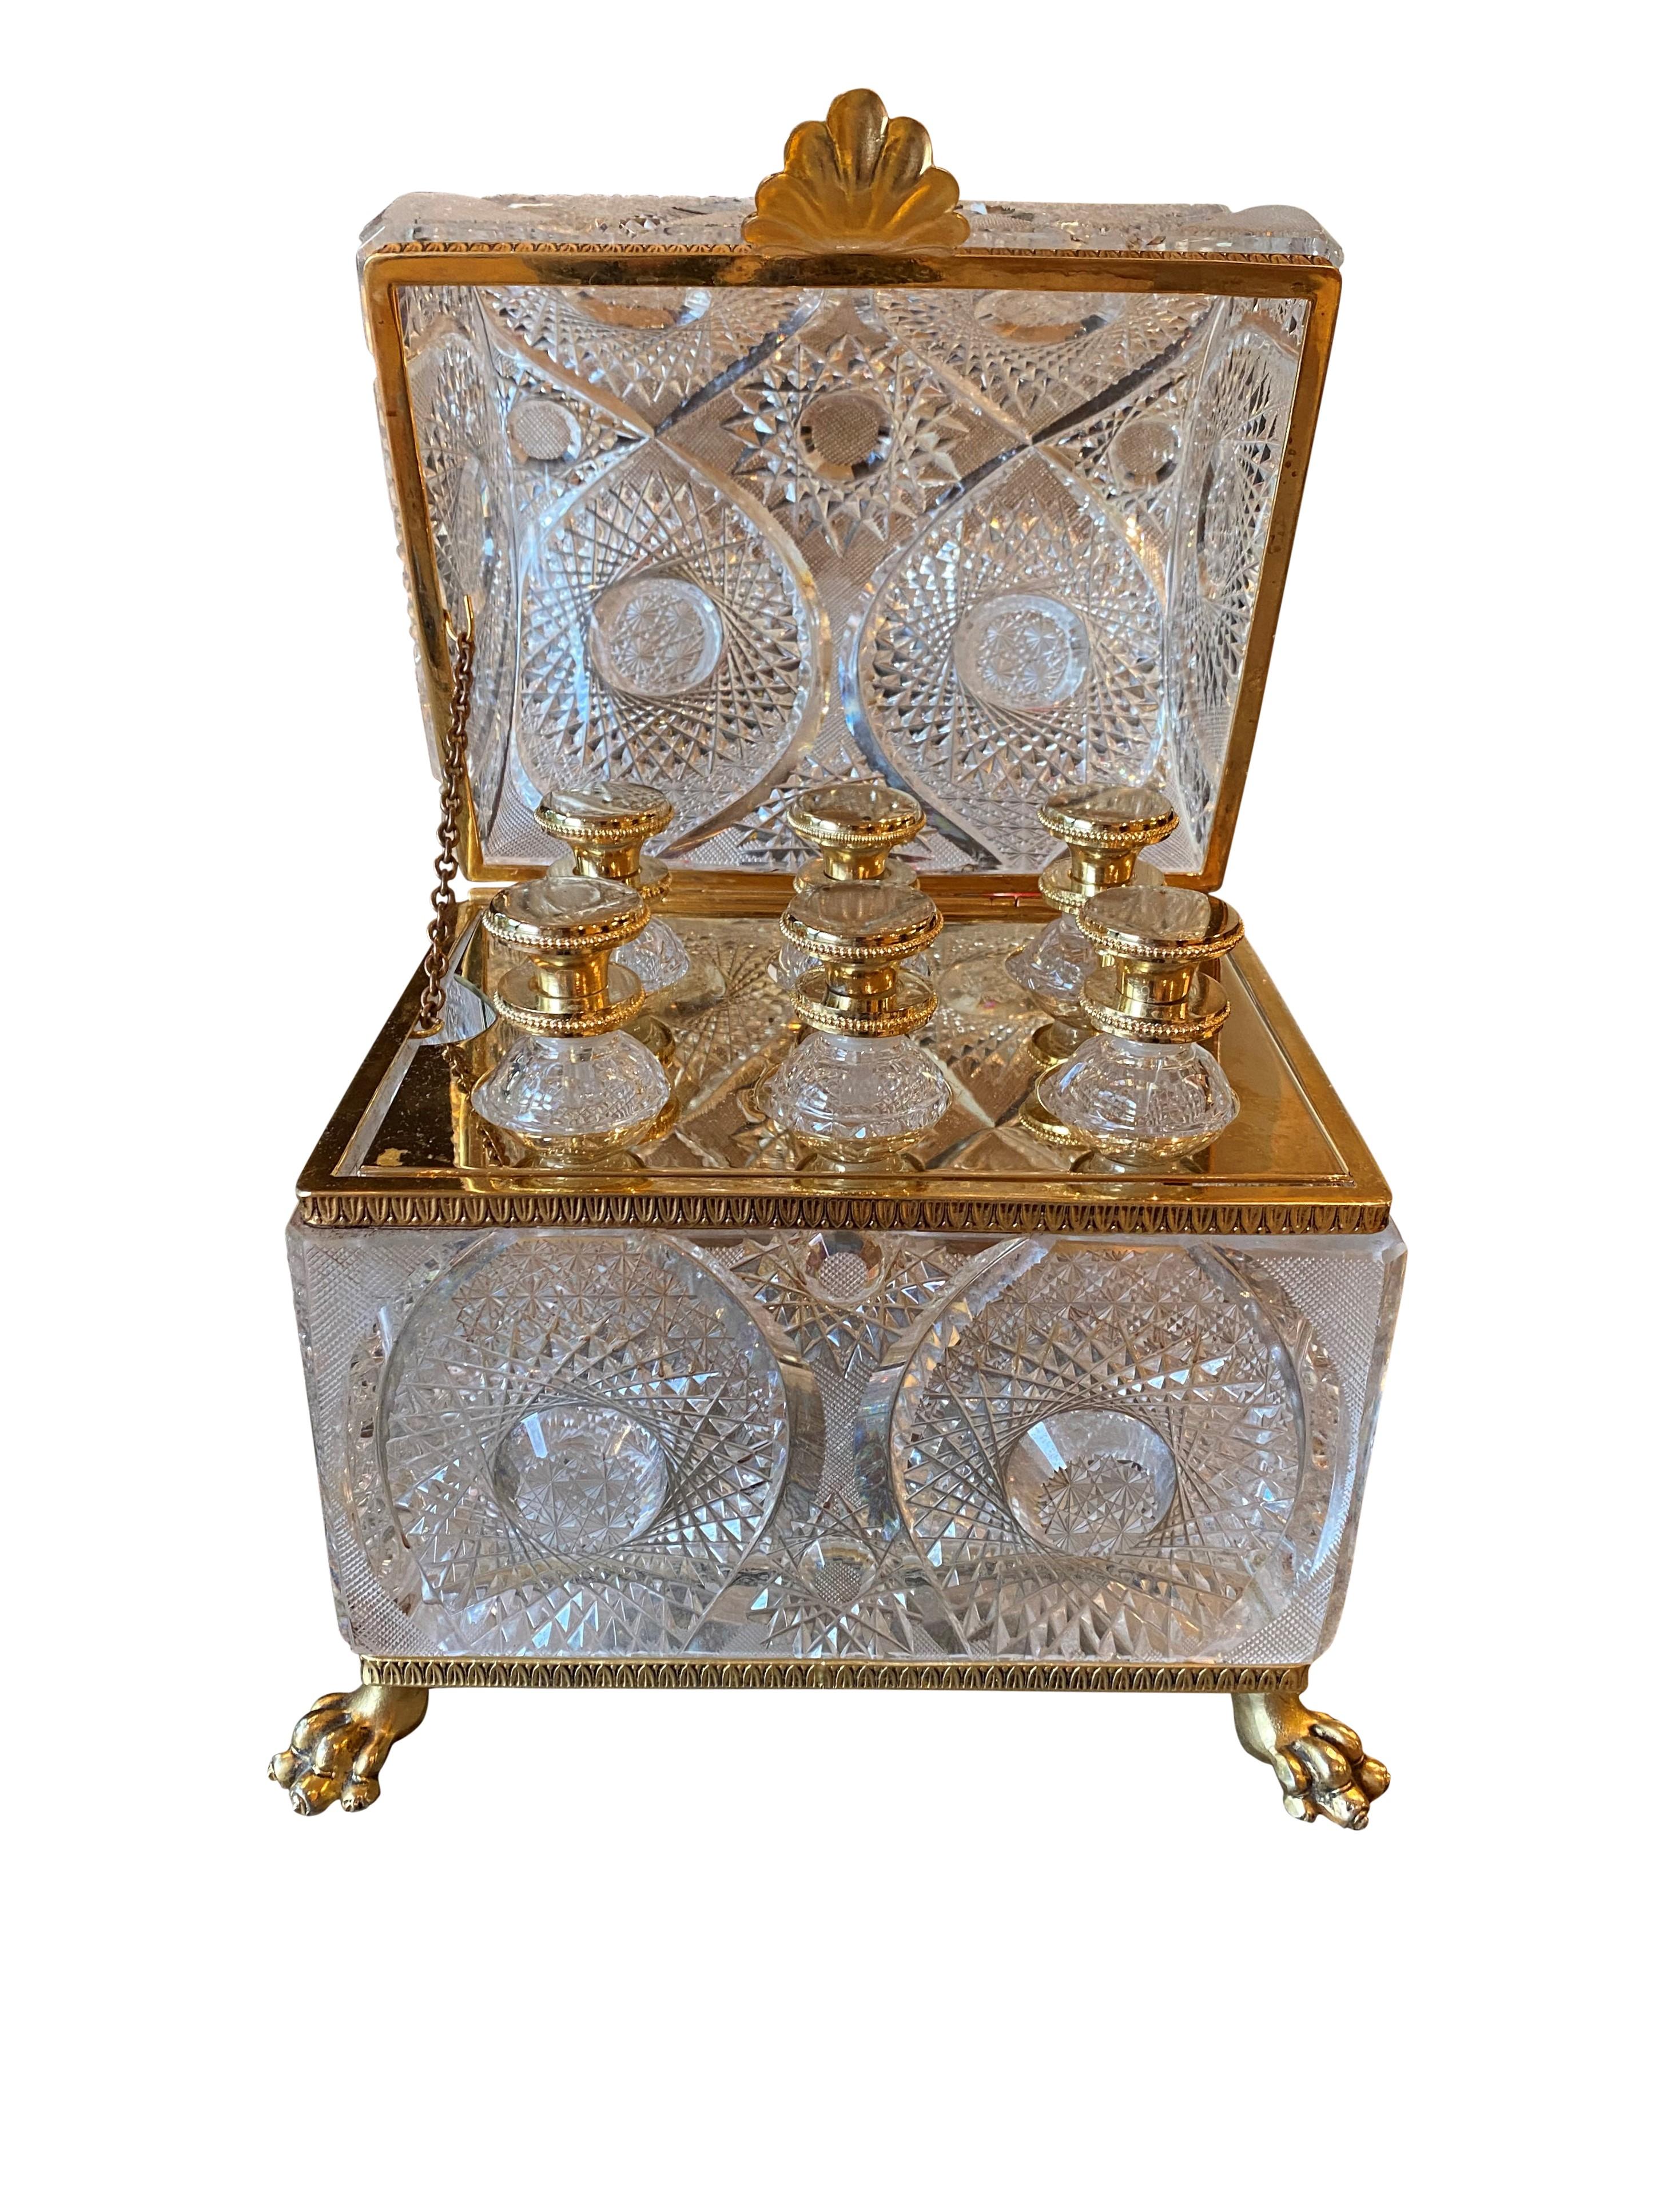 20th Century French Gilt Bronze Mounted Cut Glass Domed Casket Cristal Frères, Martin Benito